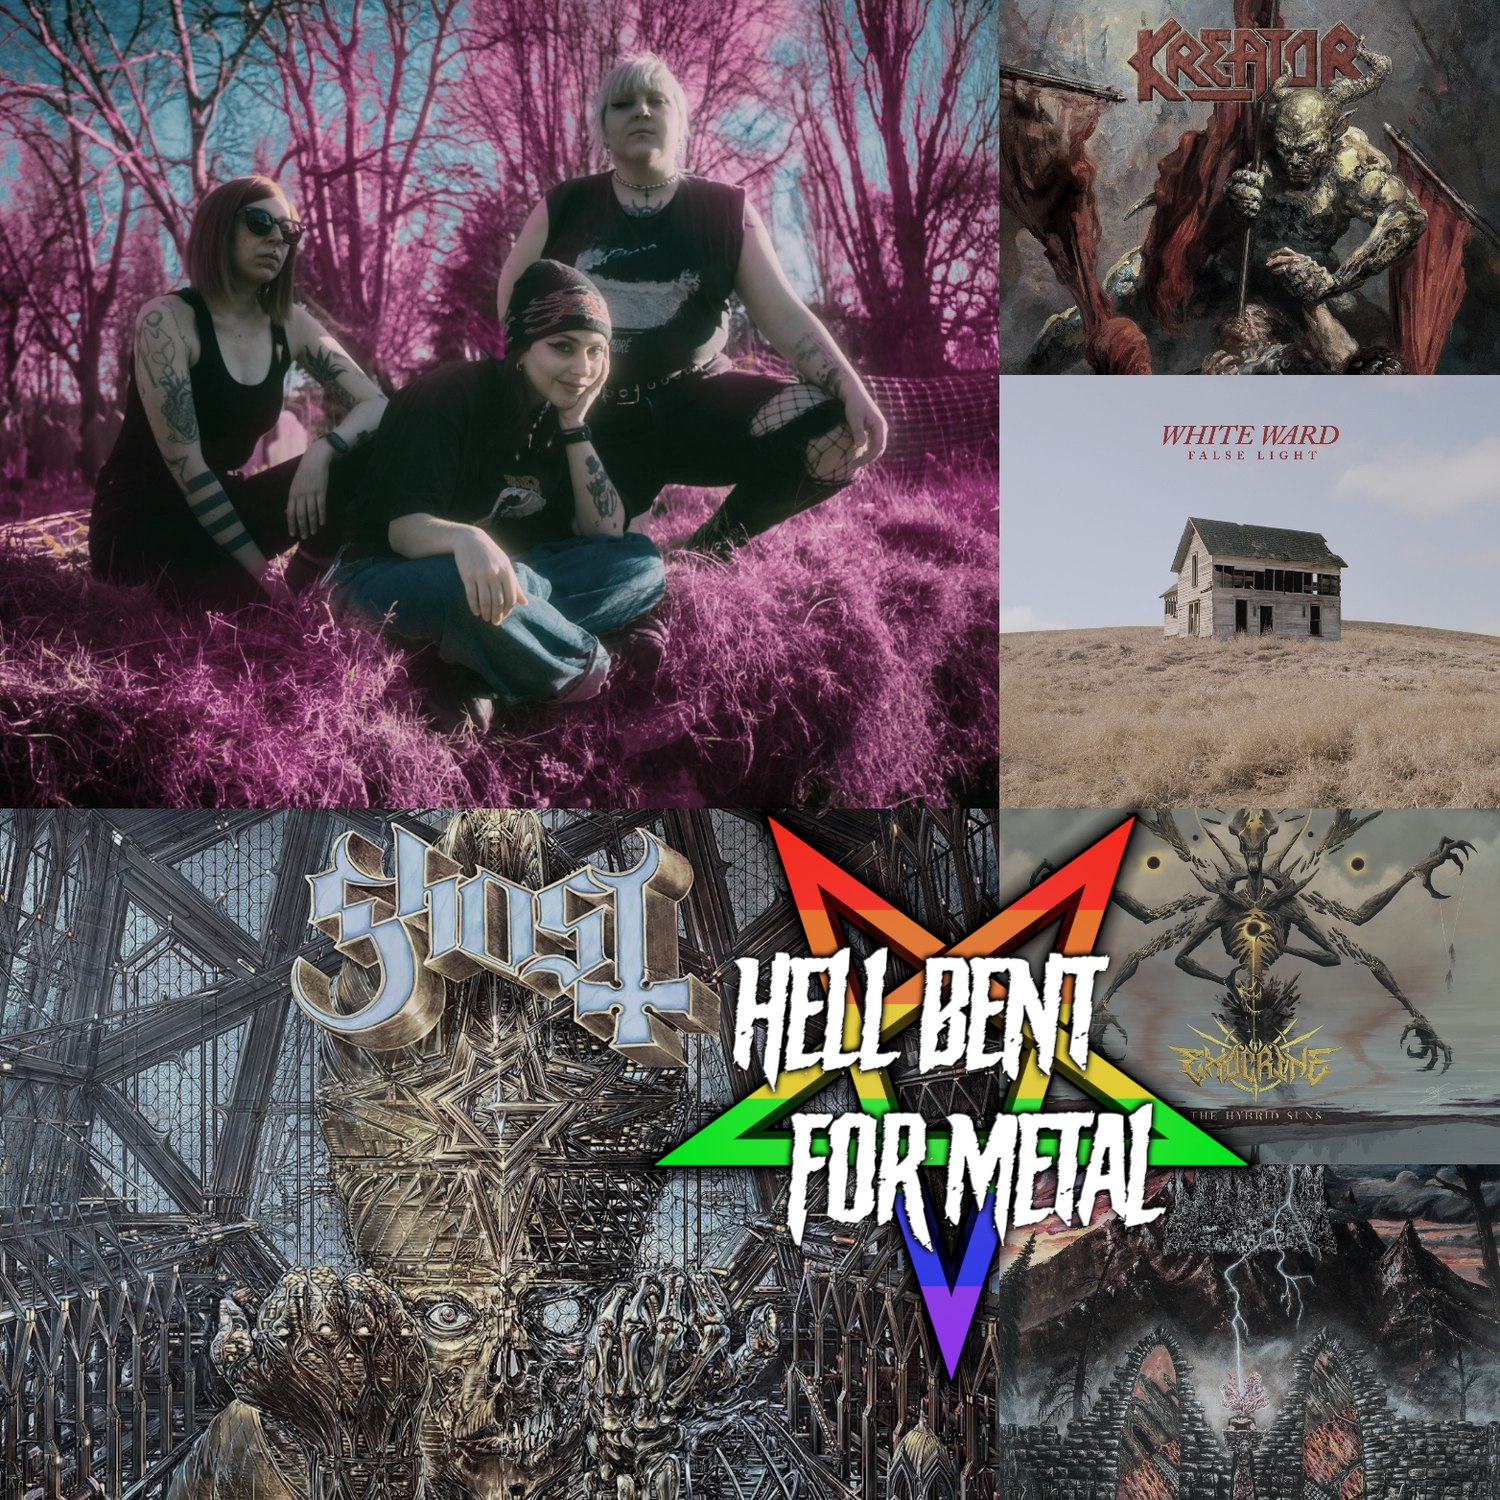 A Feminist Queercore View On Metal, on this week's Hell Bent for Metal